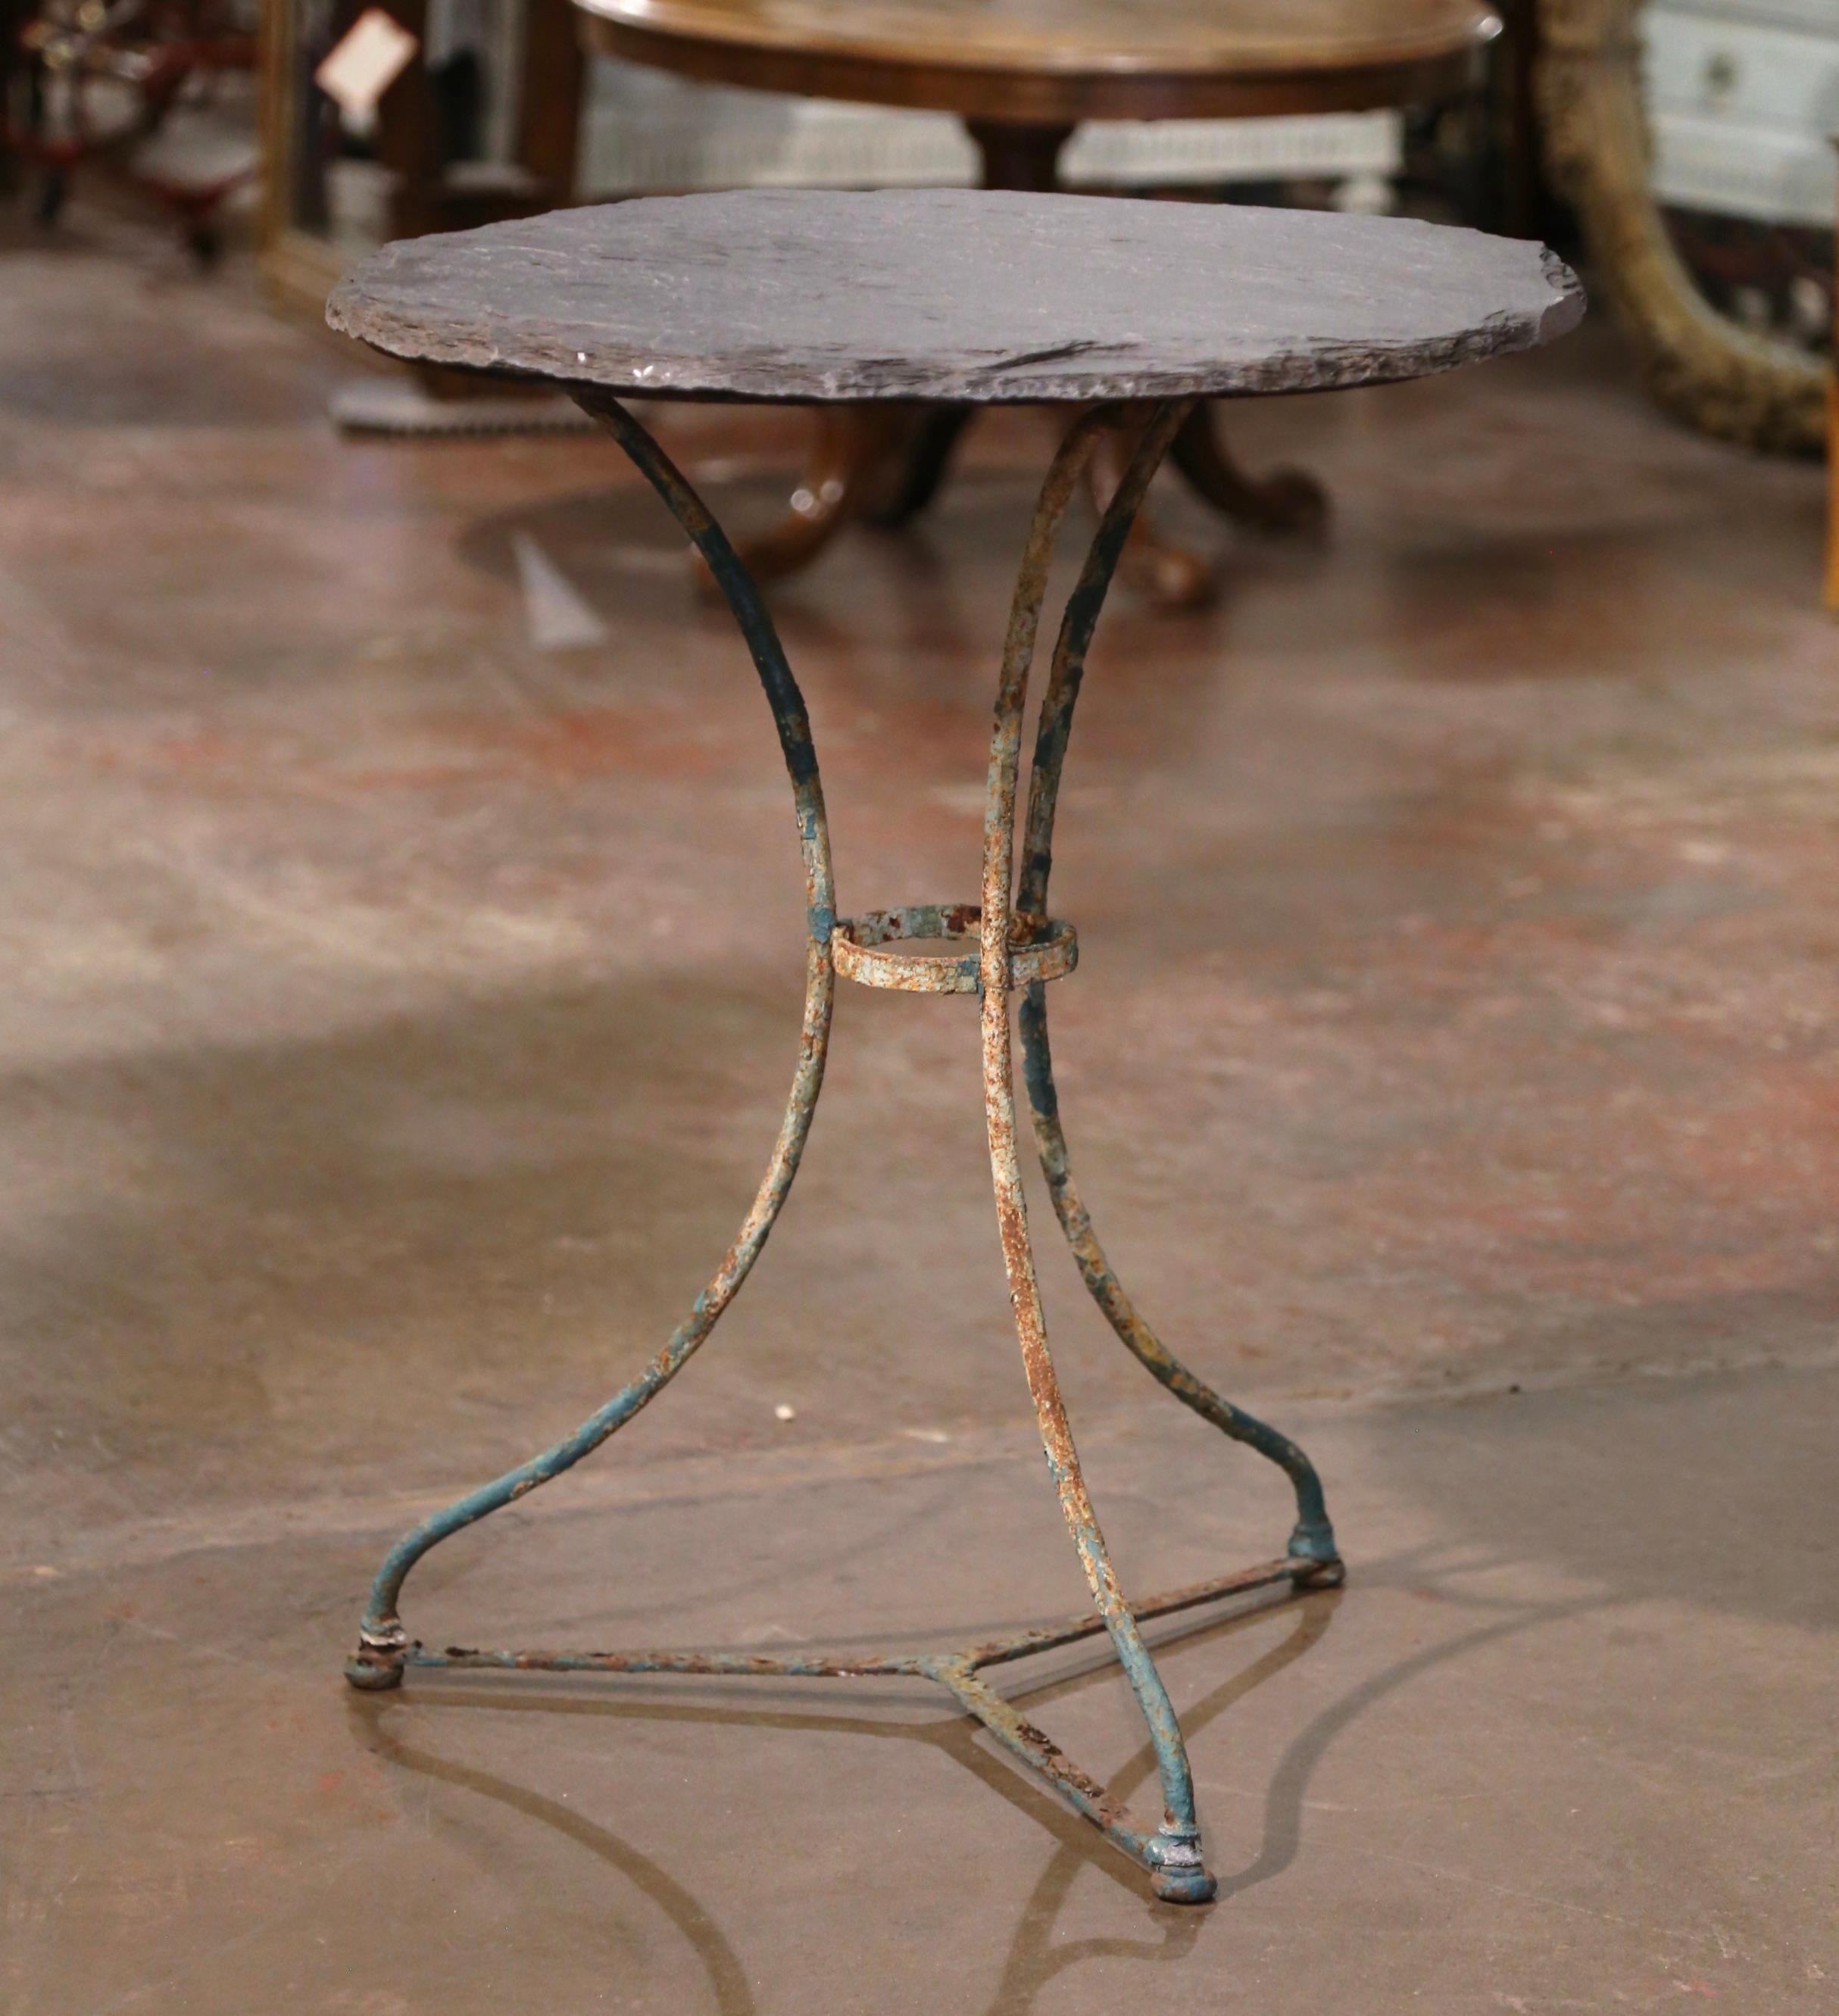 Decorate a patio or covered porch with this elegant antique round bistrot table. Crafted in France circa 1870, the cast iron table sits on three scroll legs connected with a circular stretcher. The table top is dressed with a natural finished gray